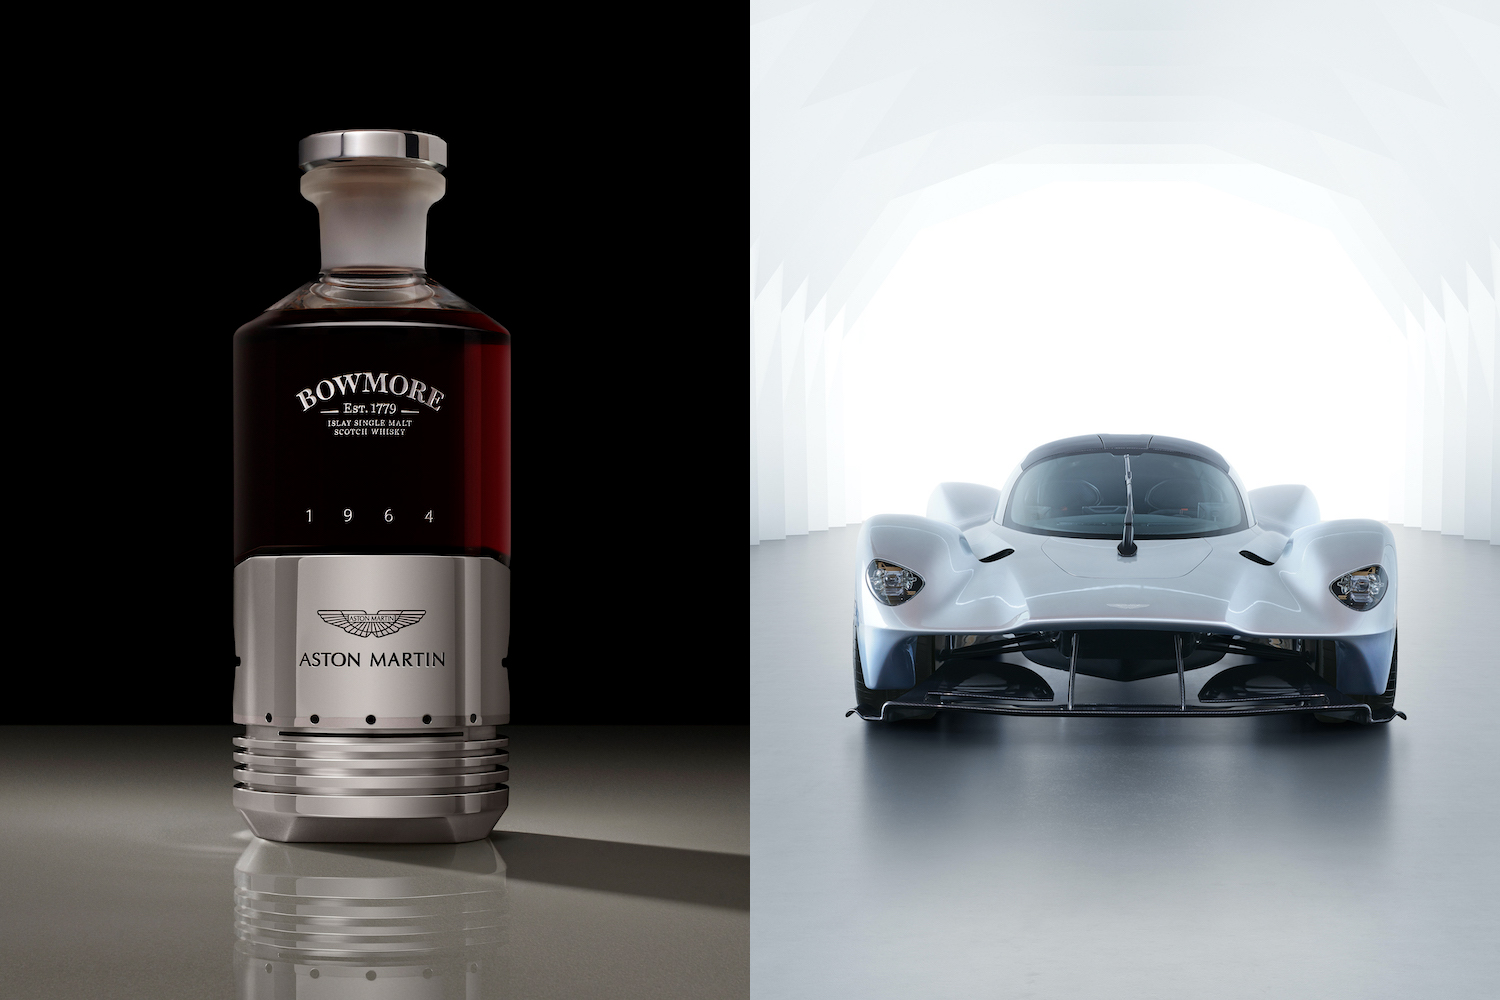 The Aston Martin Bowmore whisky bottle and the Valkyrie hypercare